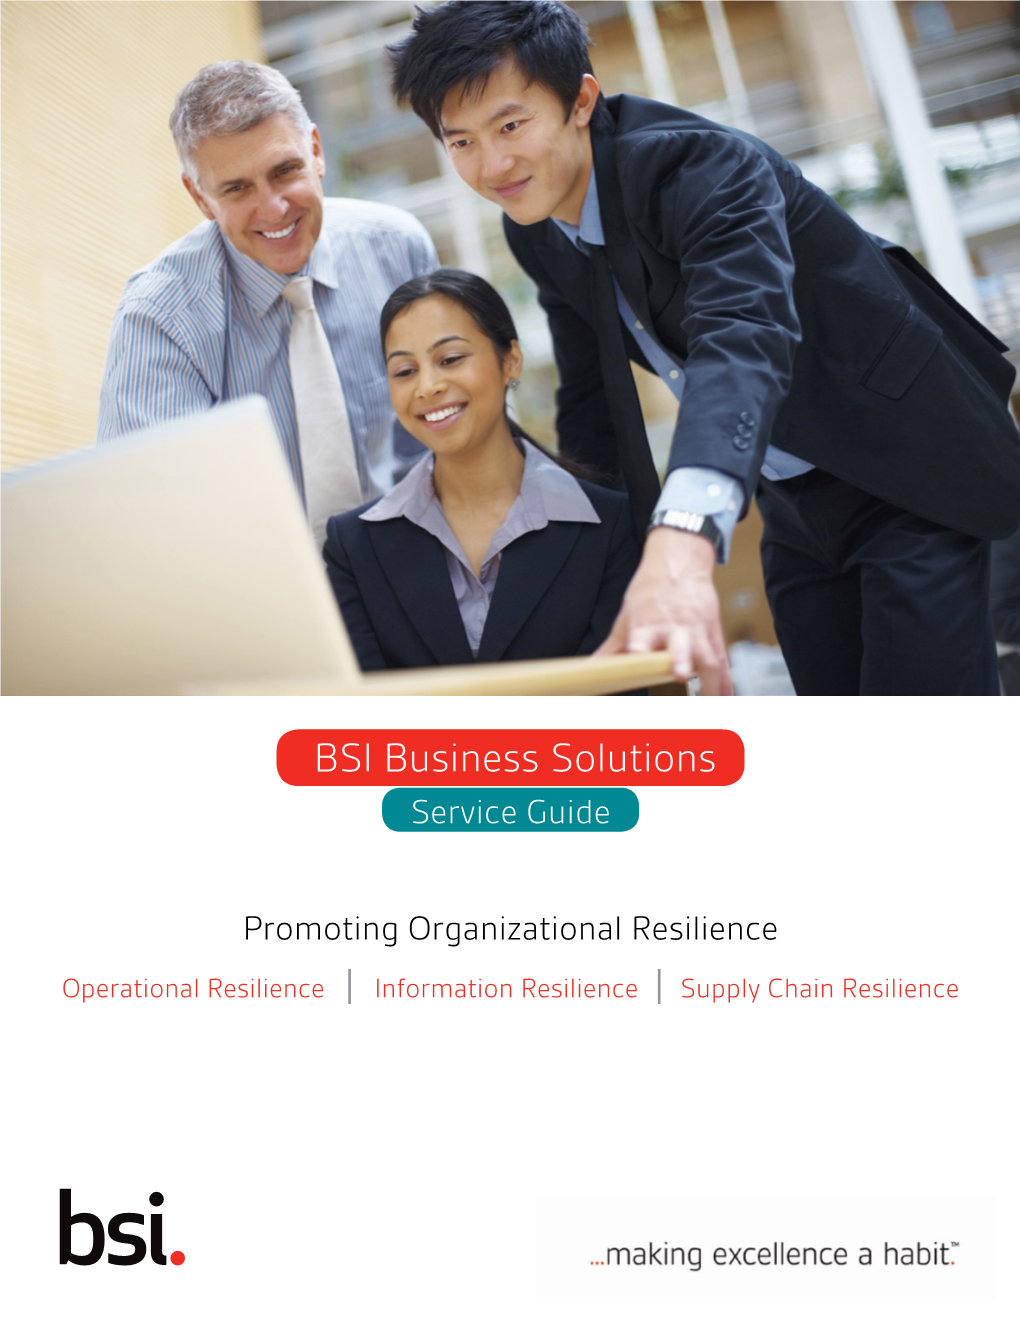 BSI Business Solutions Service Guide